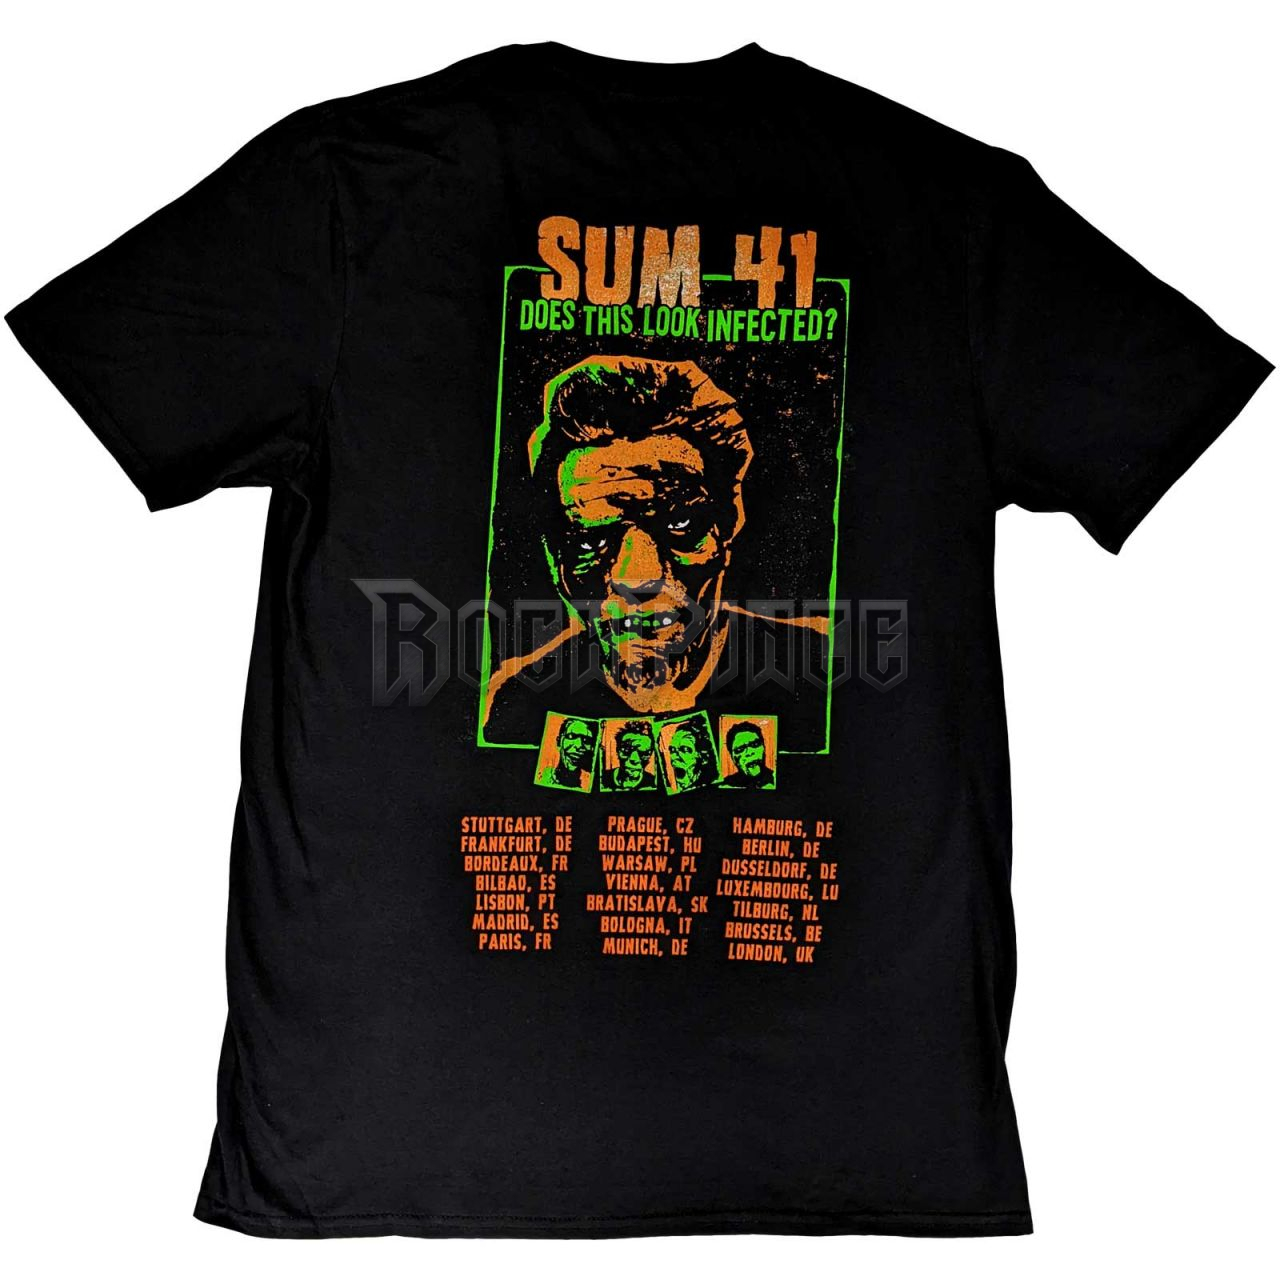 Sum 41 - Does This Look Infected? European Tour 2022 - unisex póló - SUMTS11MB